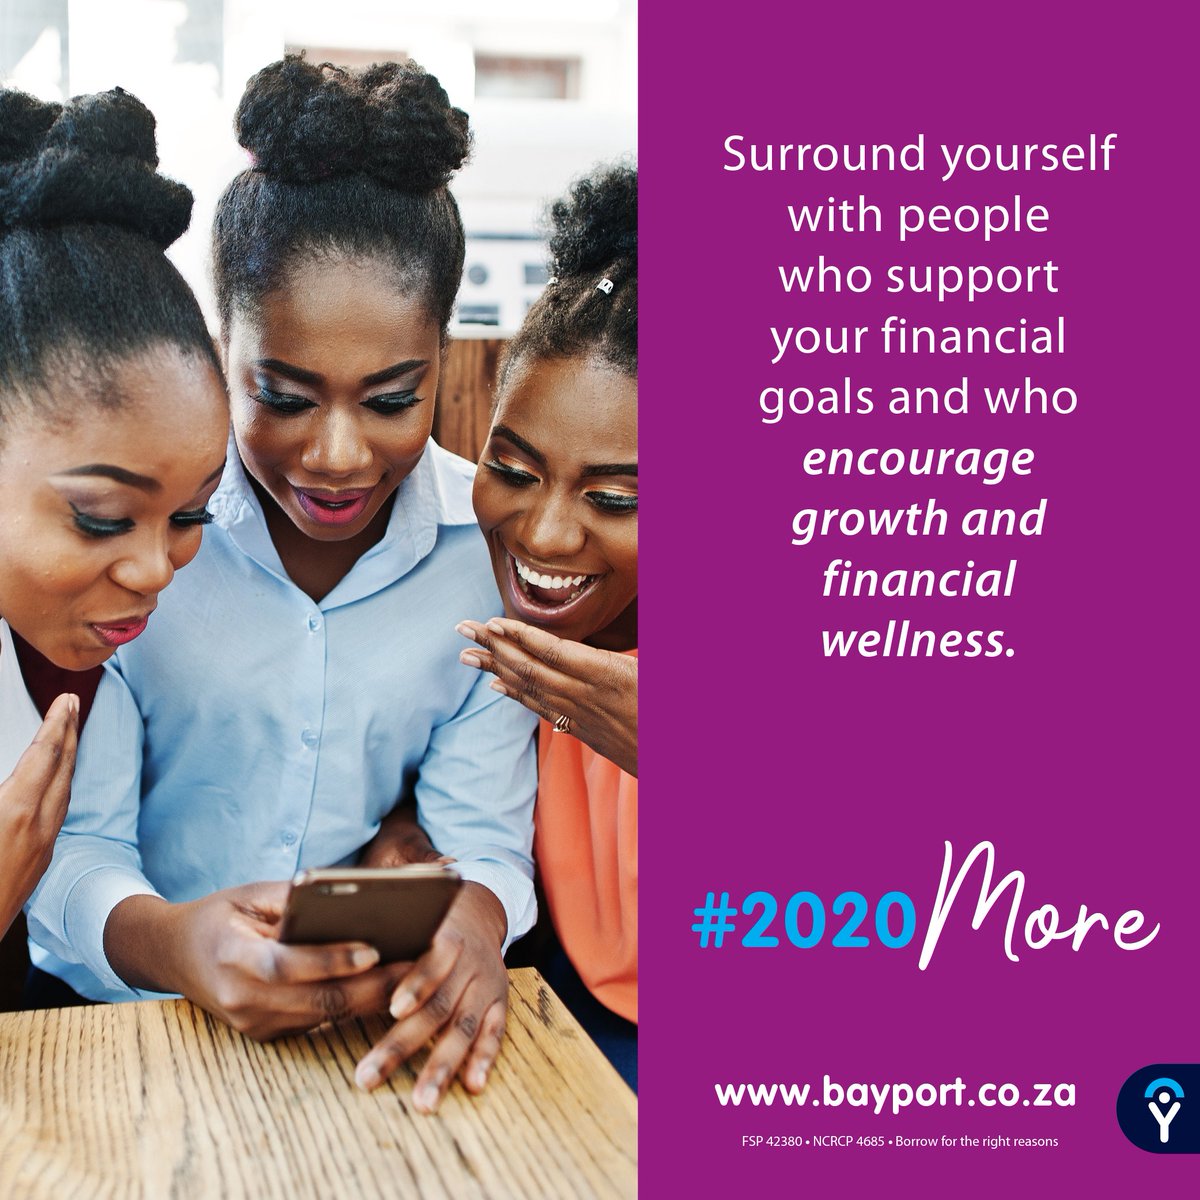 Find your financial squad and thrive together.